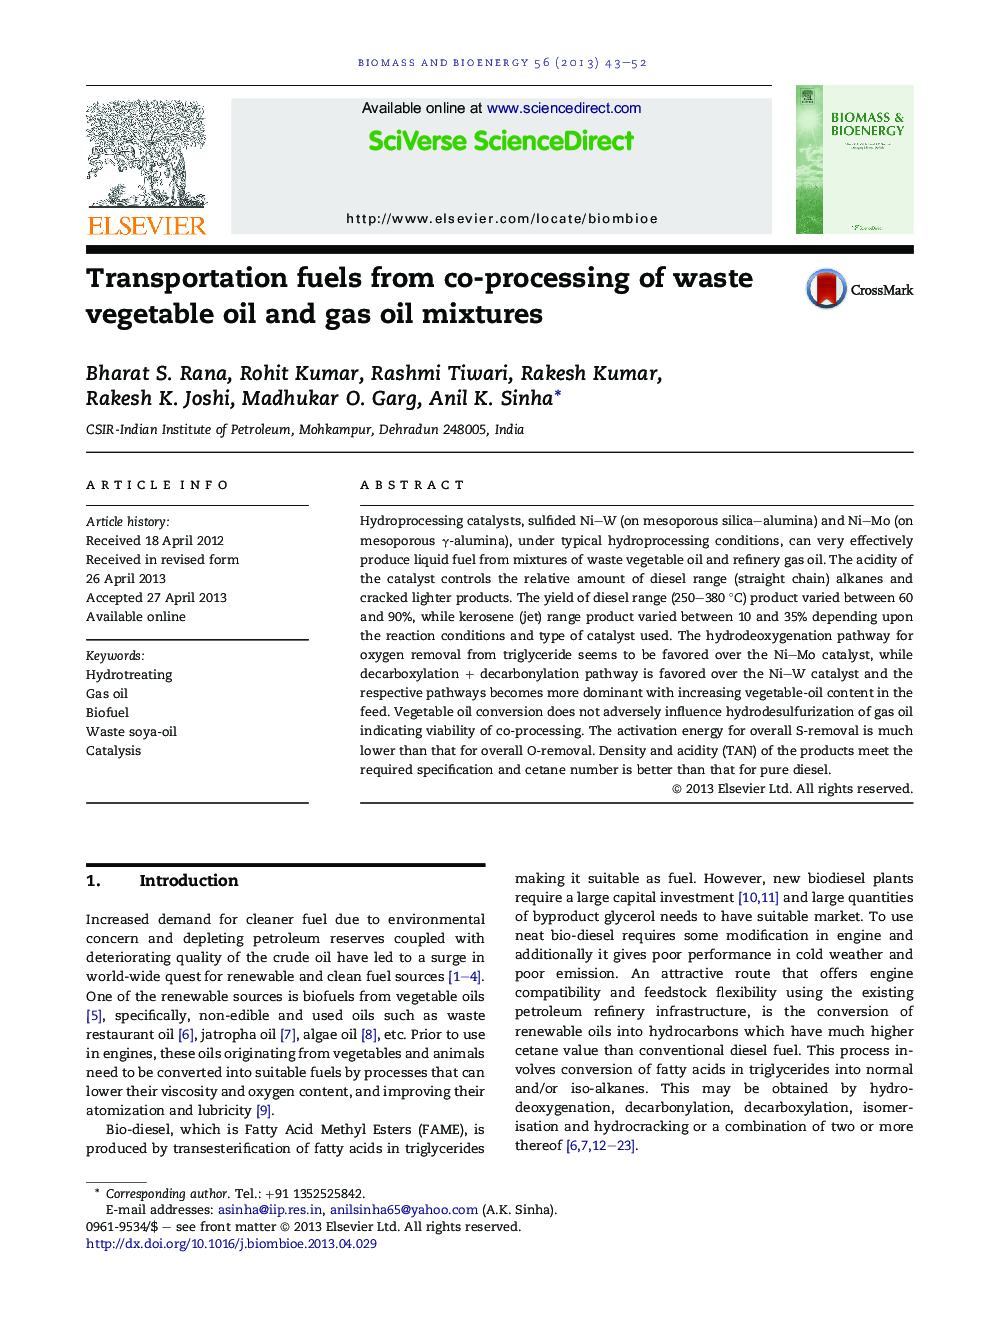 Transportation fuels from co-processing of waste vegetable oil and gas oil mixtures